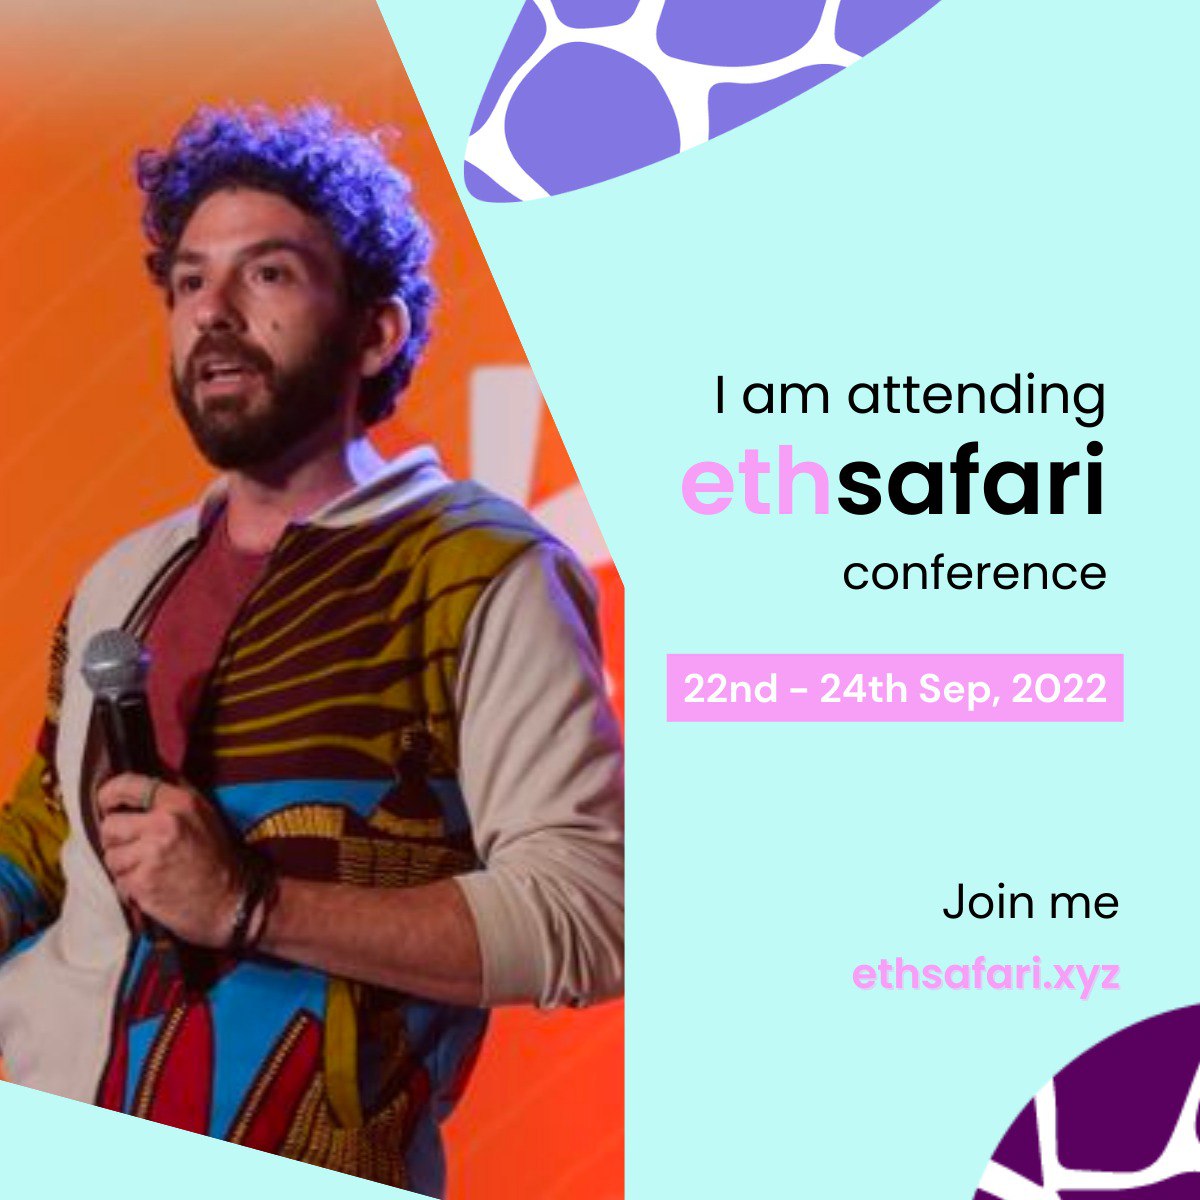 Very proud of what this ecosystem is capable when a community of hard-believing decentralists come together with a mission to host the first major ETH Event in the region! #KaribuSafari Buy Tix Now @ ethsafari.xyz